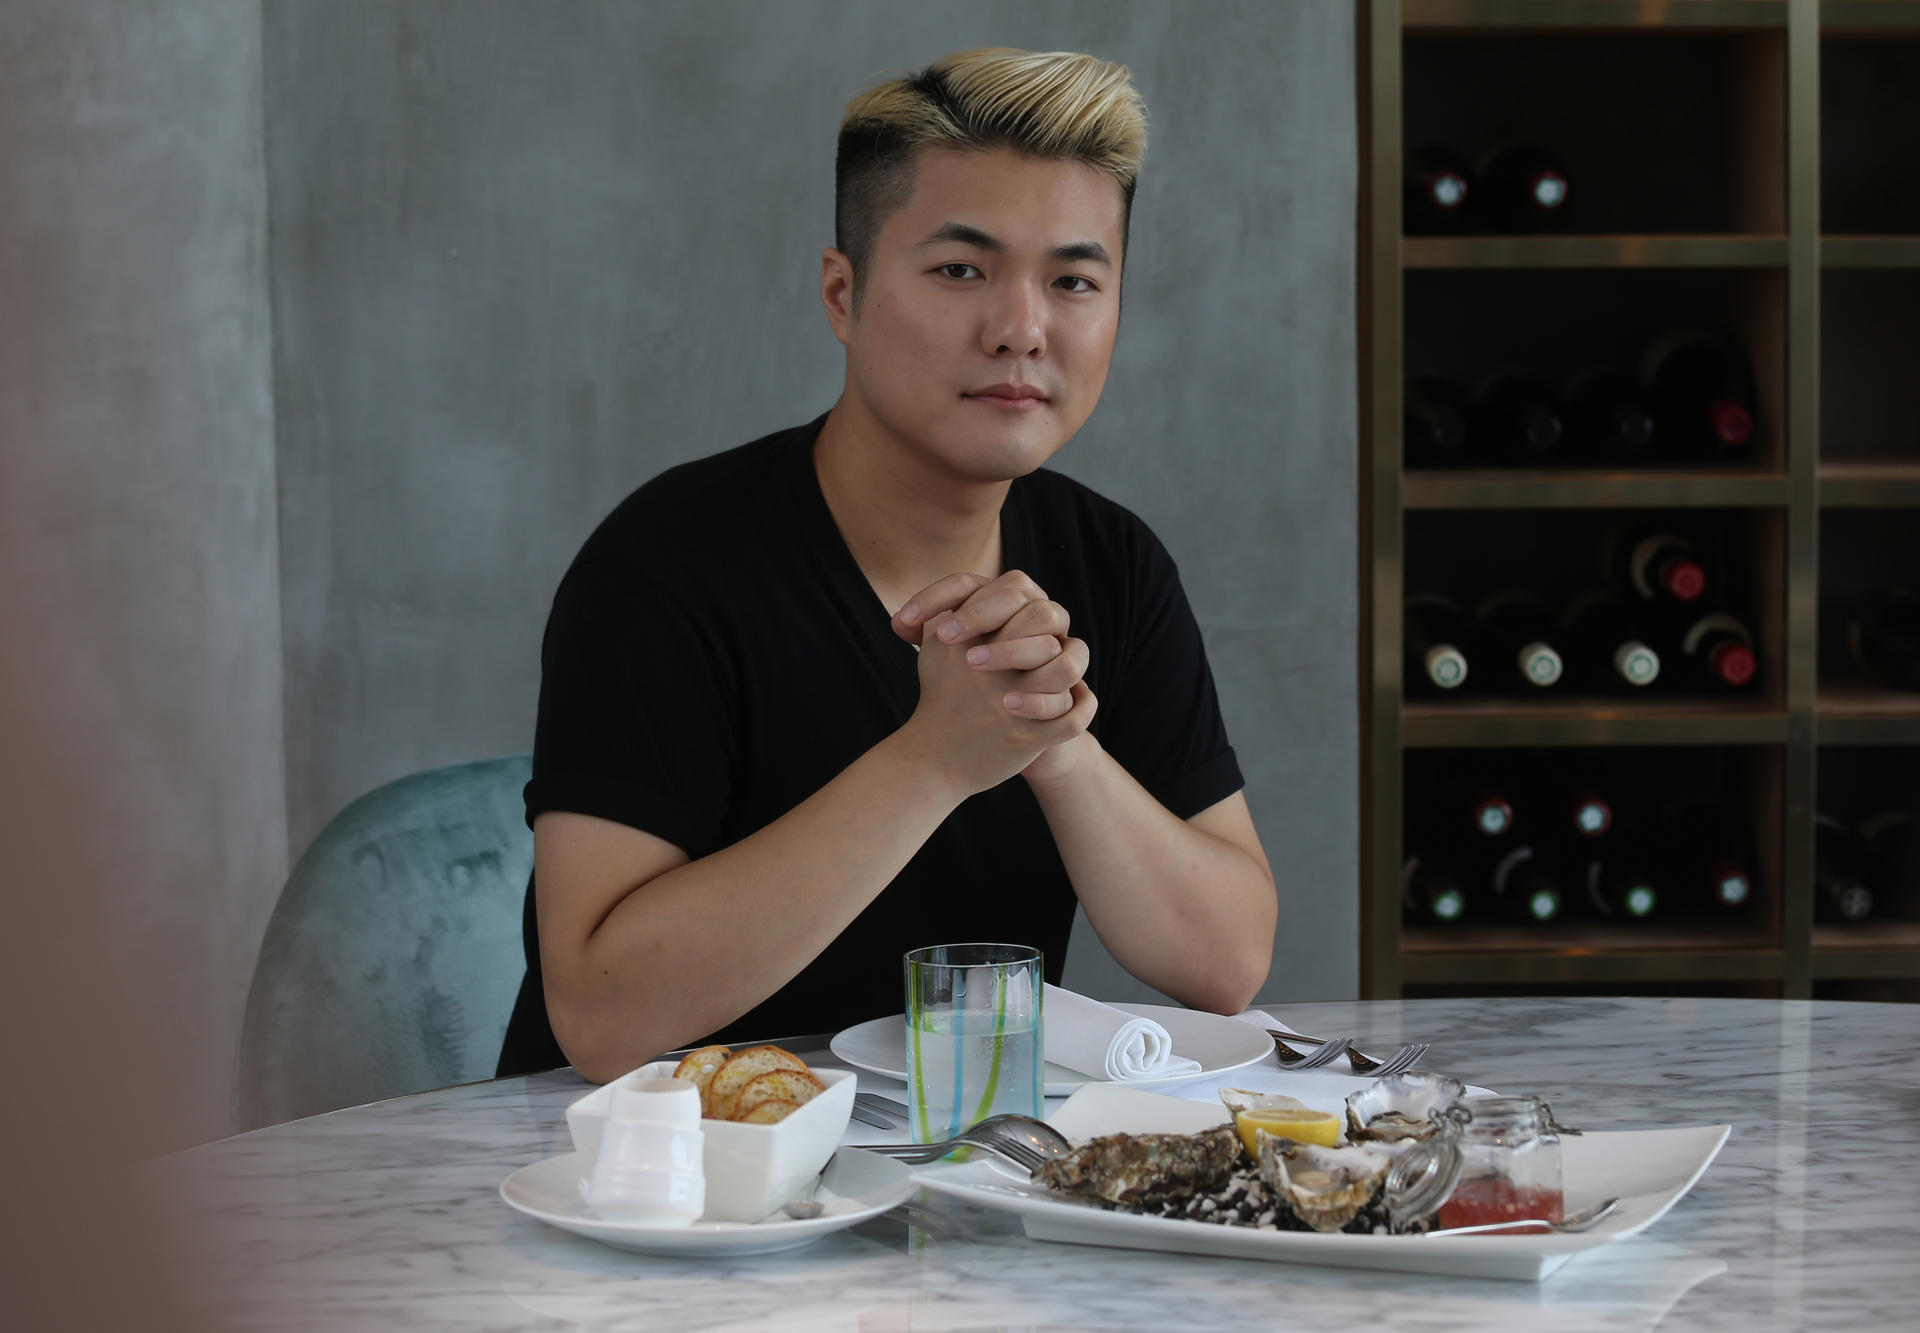 Fashion designer Erbert Chong is well-versed in French food, as he spends a great deal of time in Paris. Photos: K. Y. Cheng